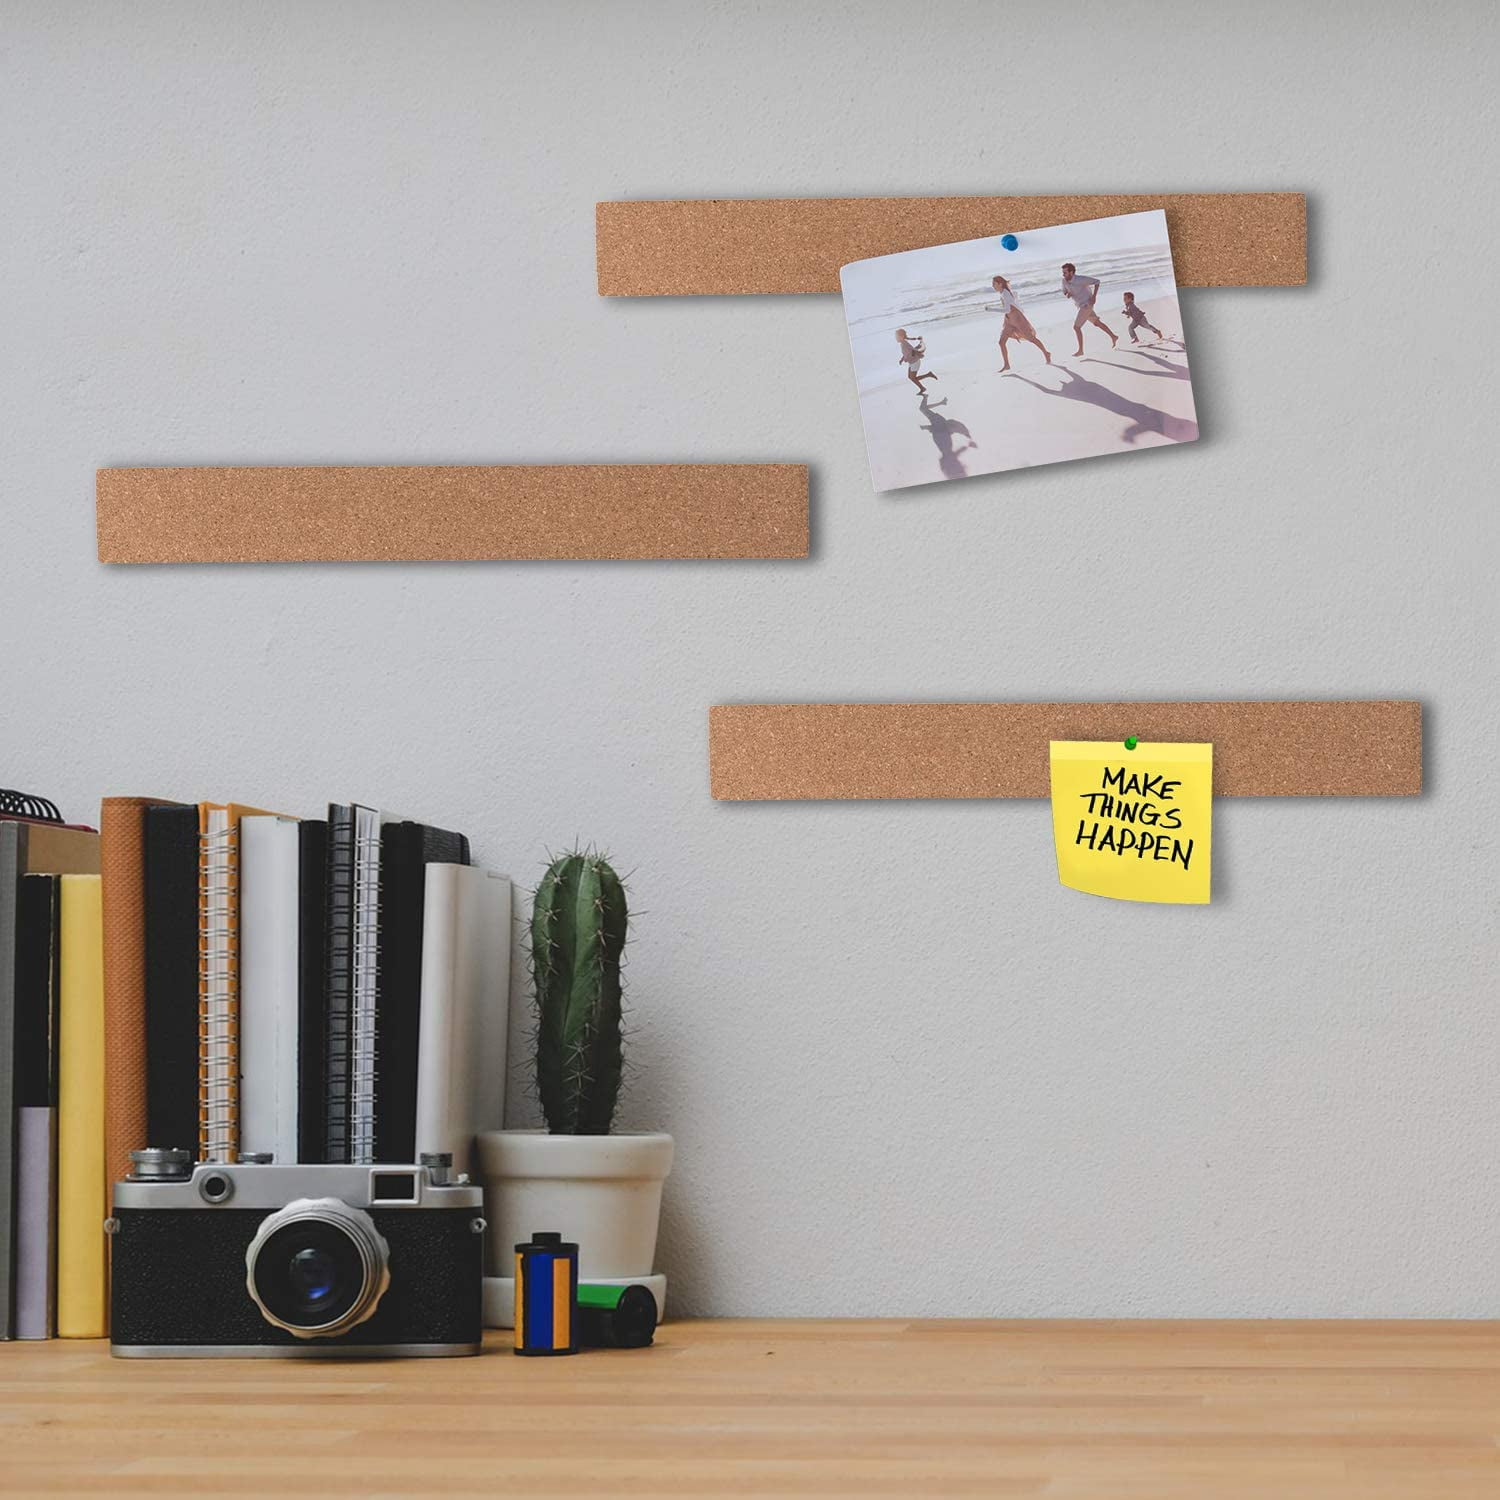 HBlife Cork Board Bulletin Board Bar Strip 15x2 Inch - 1/2 Inch Thick, 100%  Natural Frameless Cork Board Strips with 50 Multi-Color Push Pins, Strong